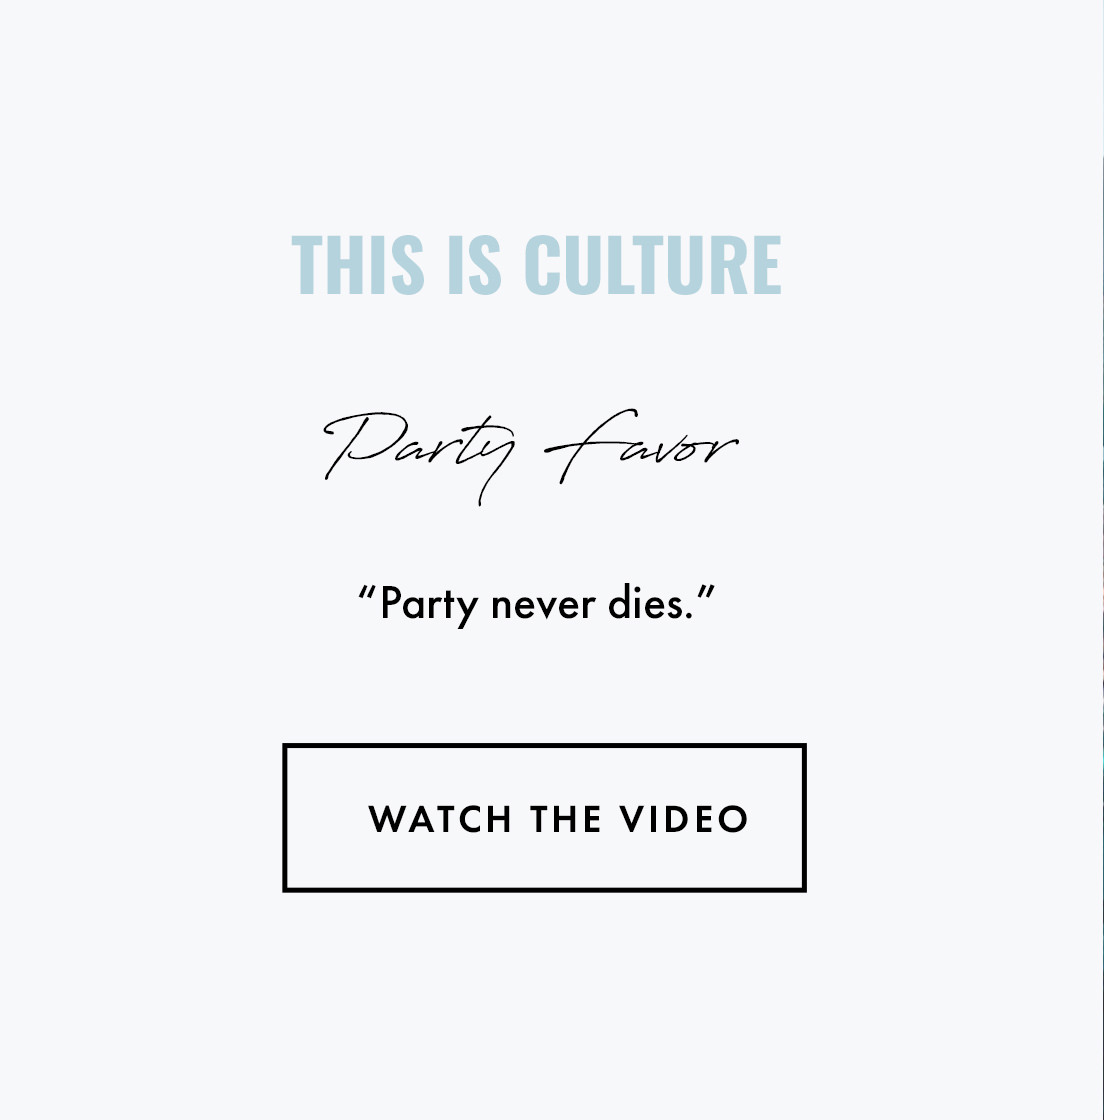 This is Culture Party Favor. "Party never dies." Watch the video